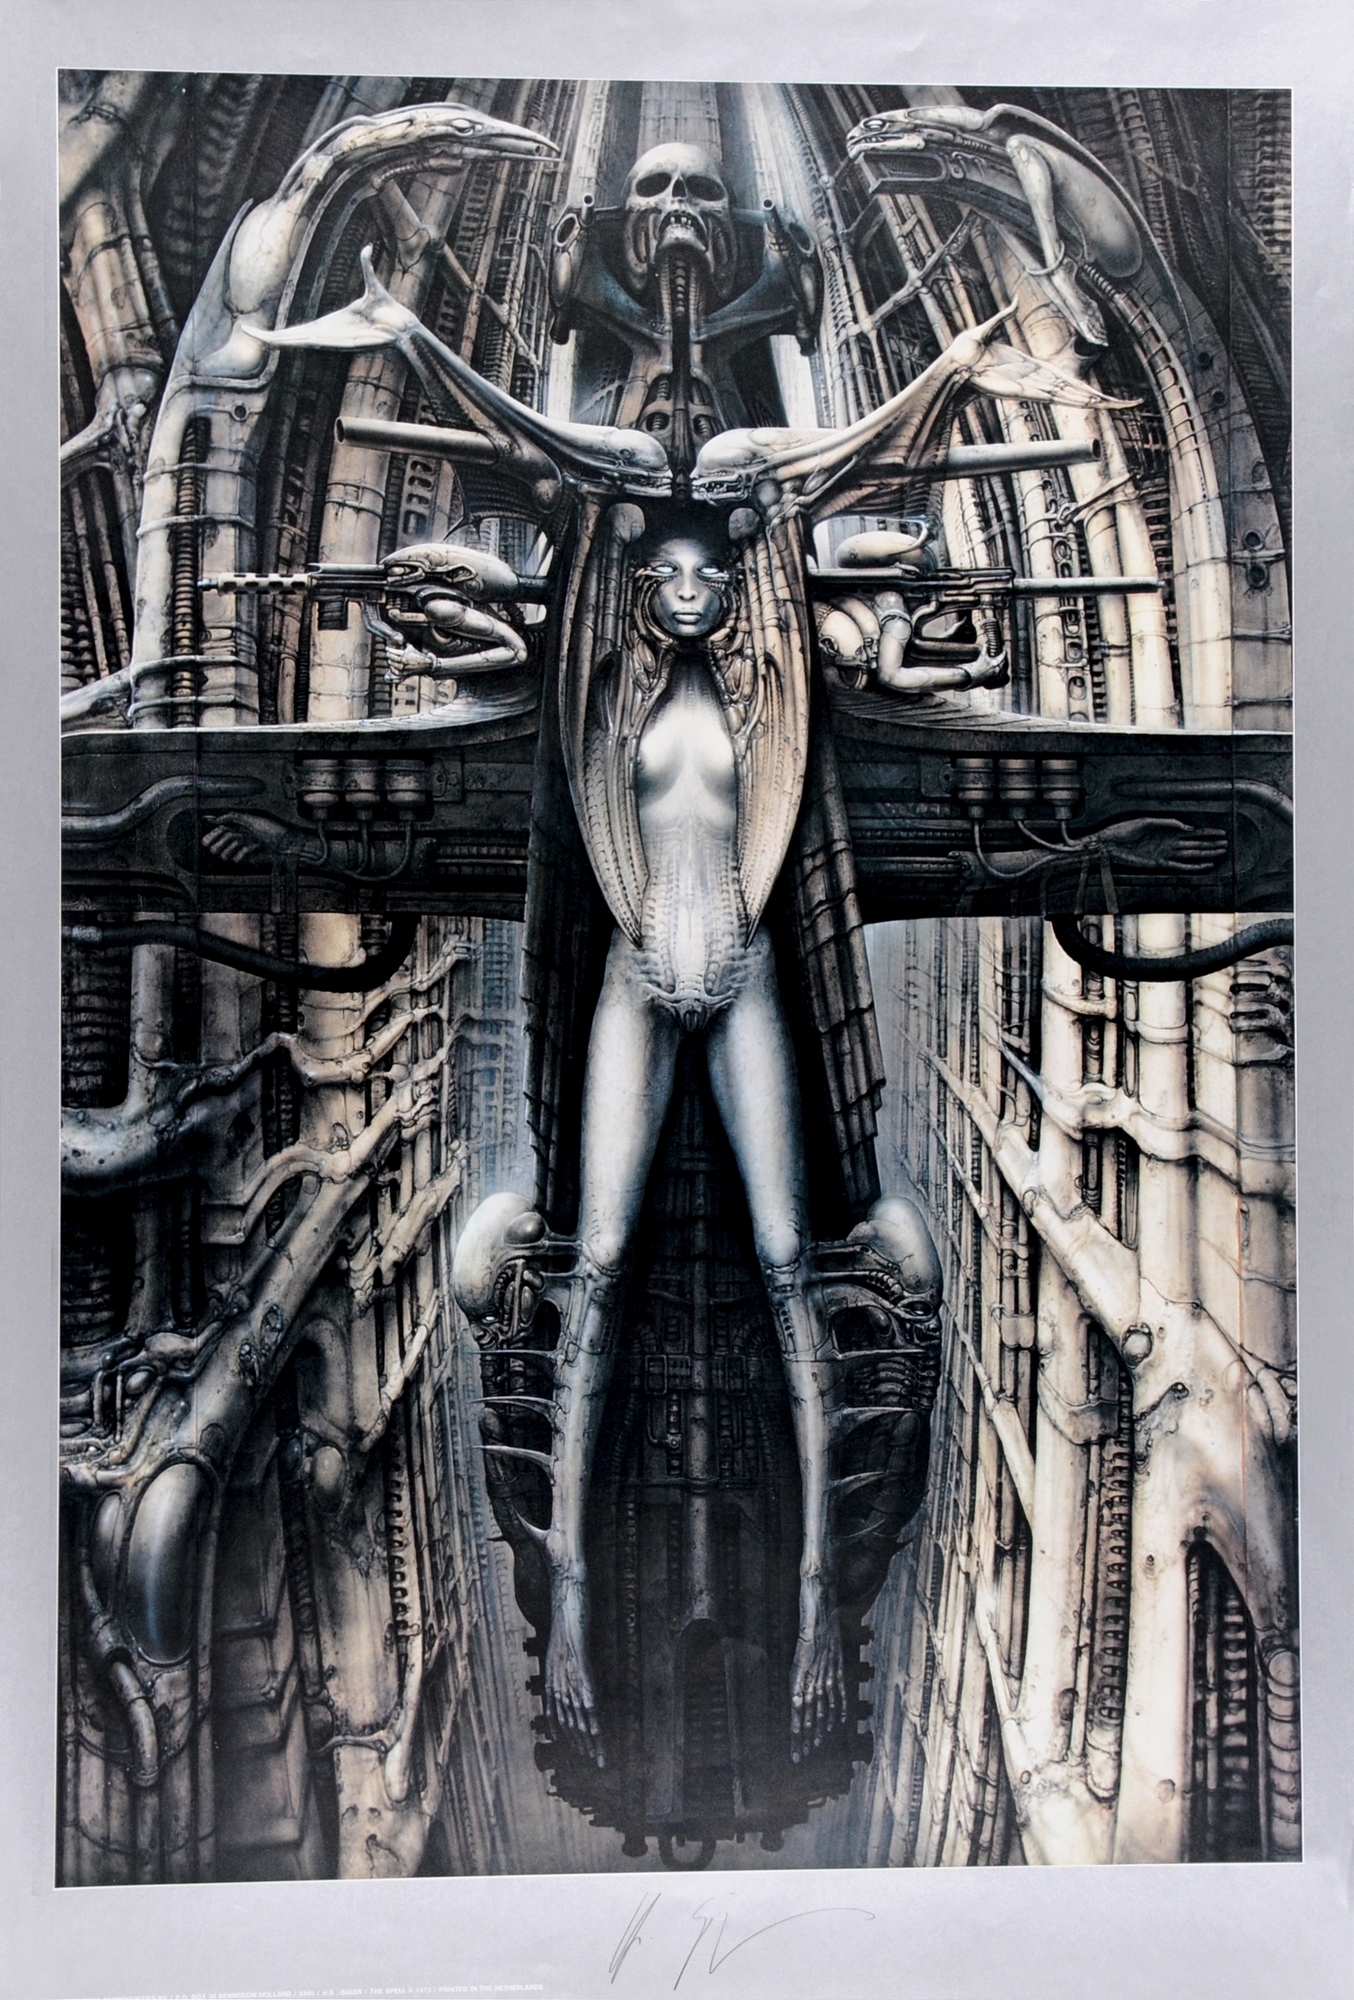 Artwork by H. R. Giger, Biomechanical Landscape IIa, Made of Photogravure